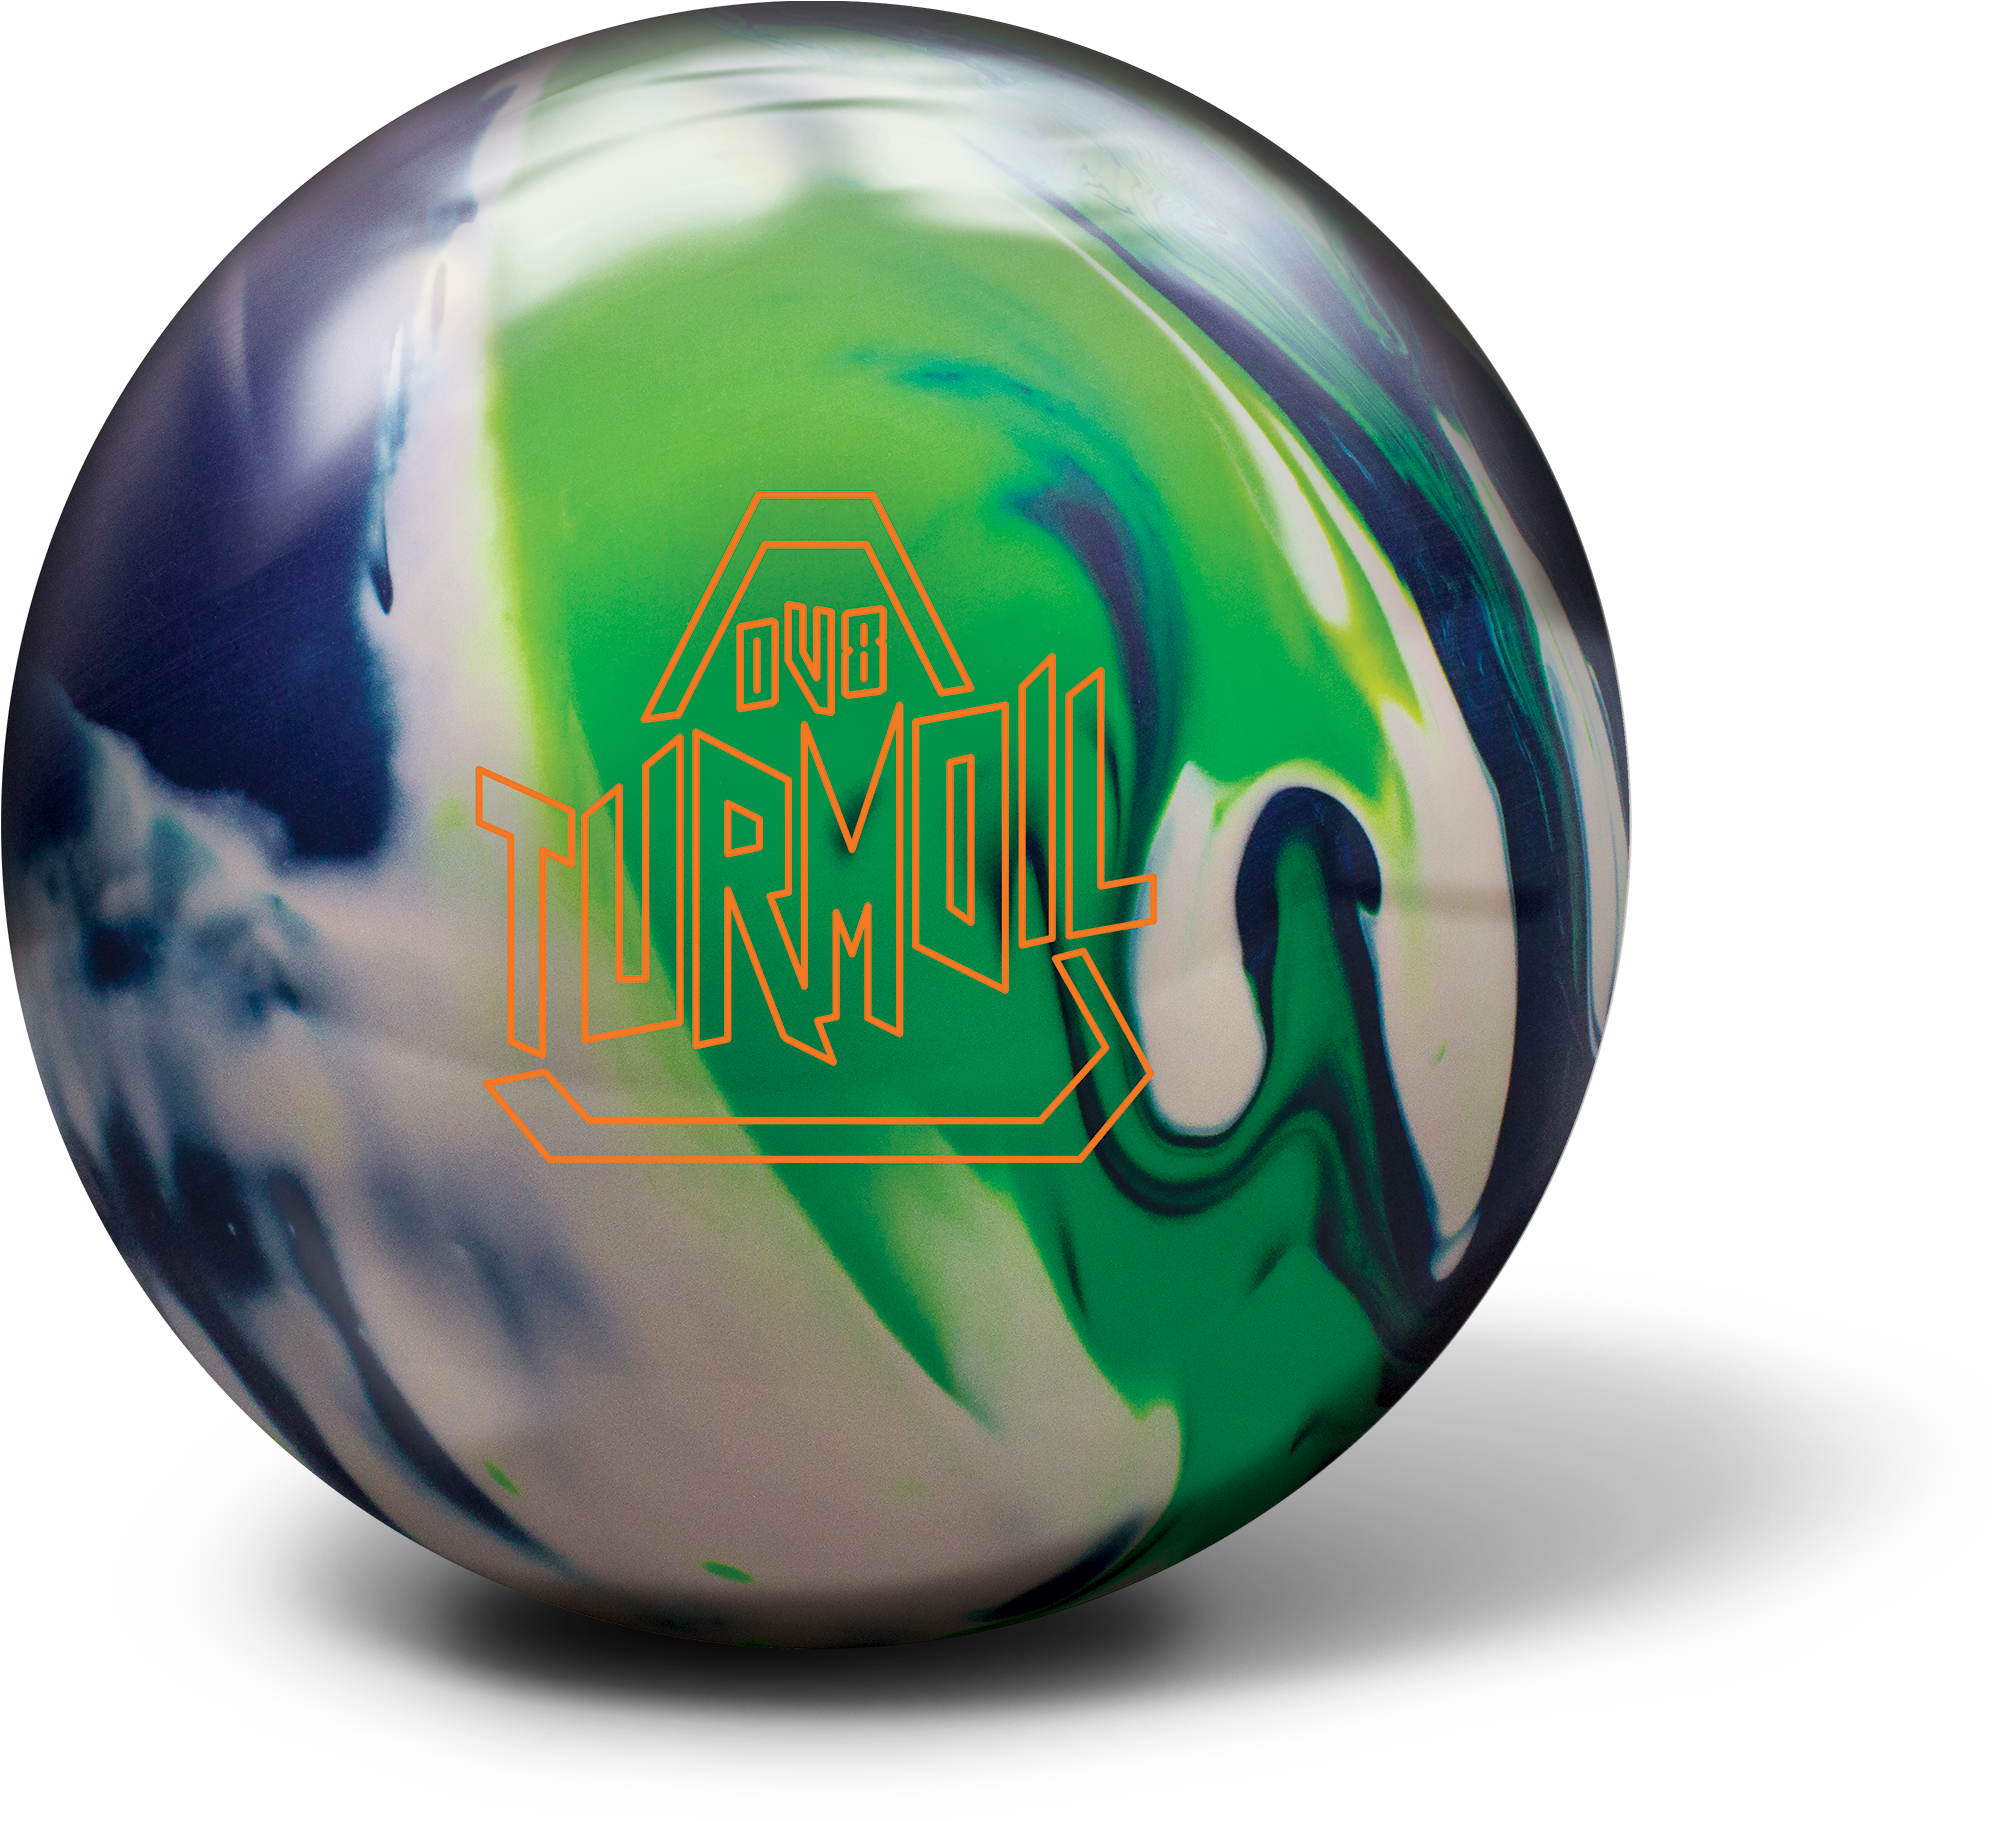 A Colorful Bowling Ball With A Logo On It